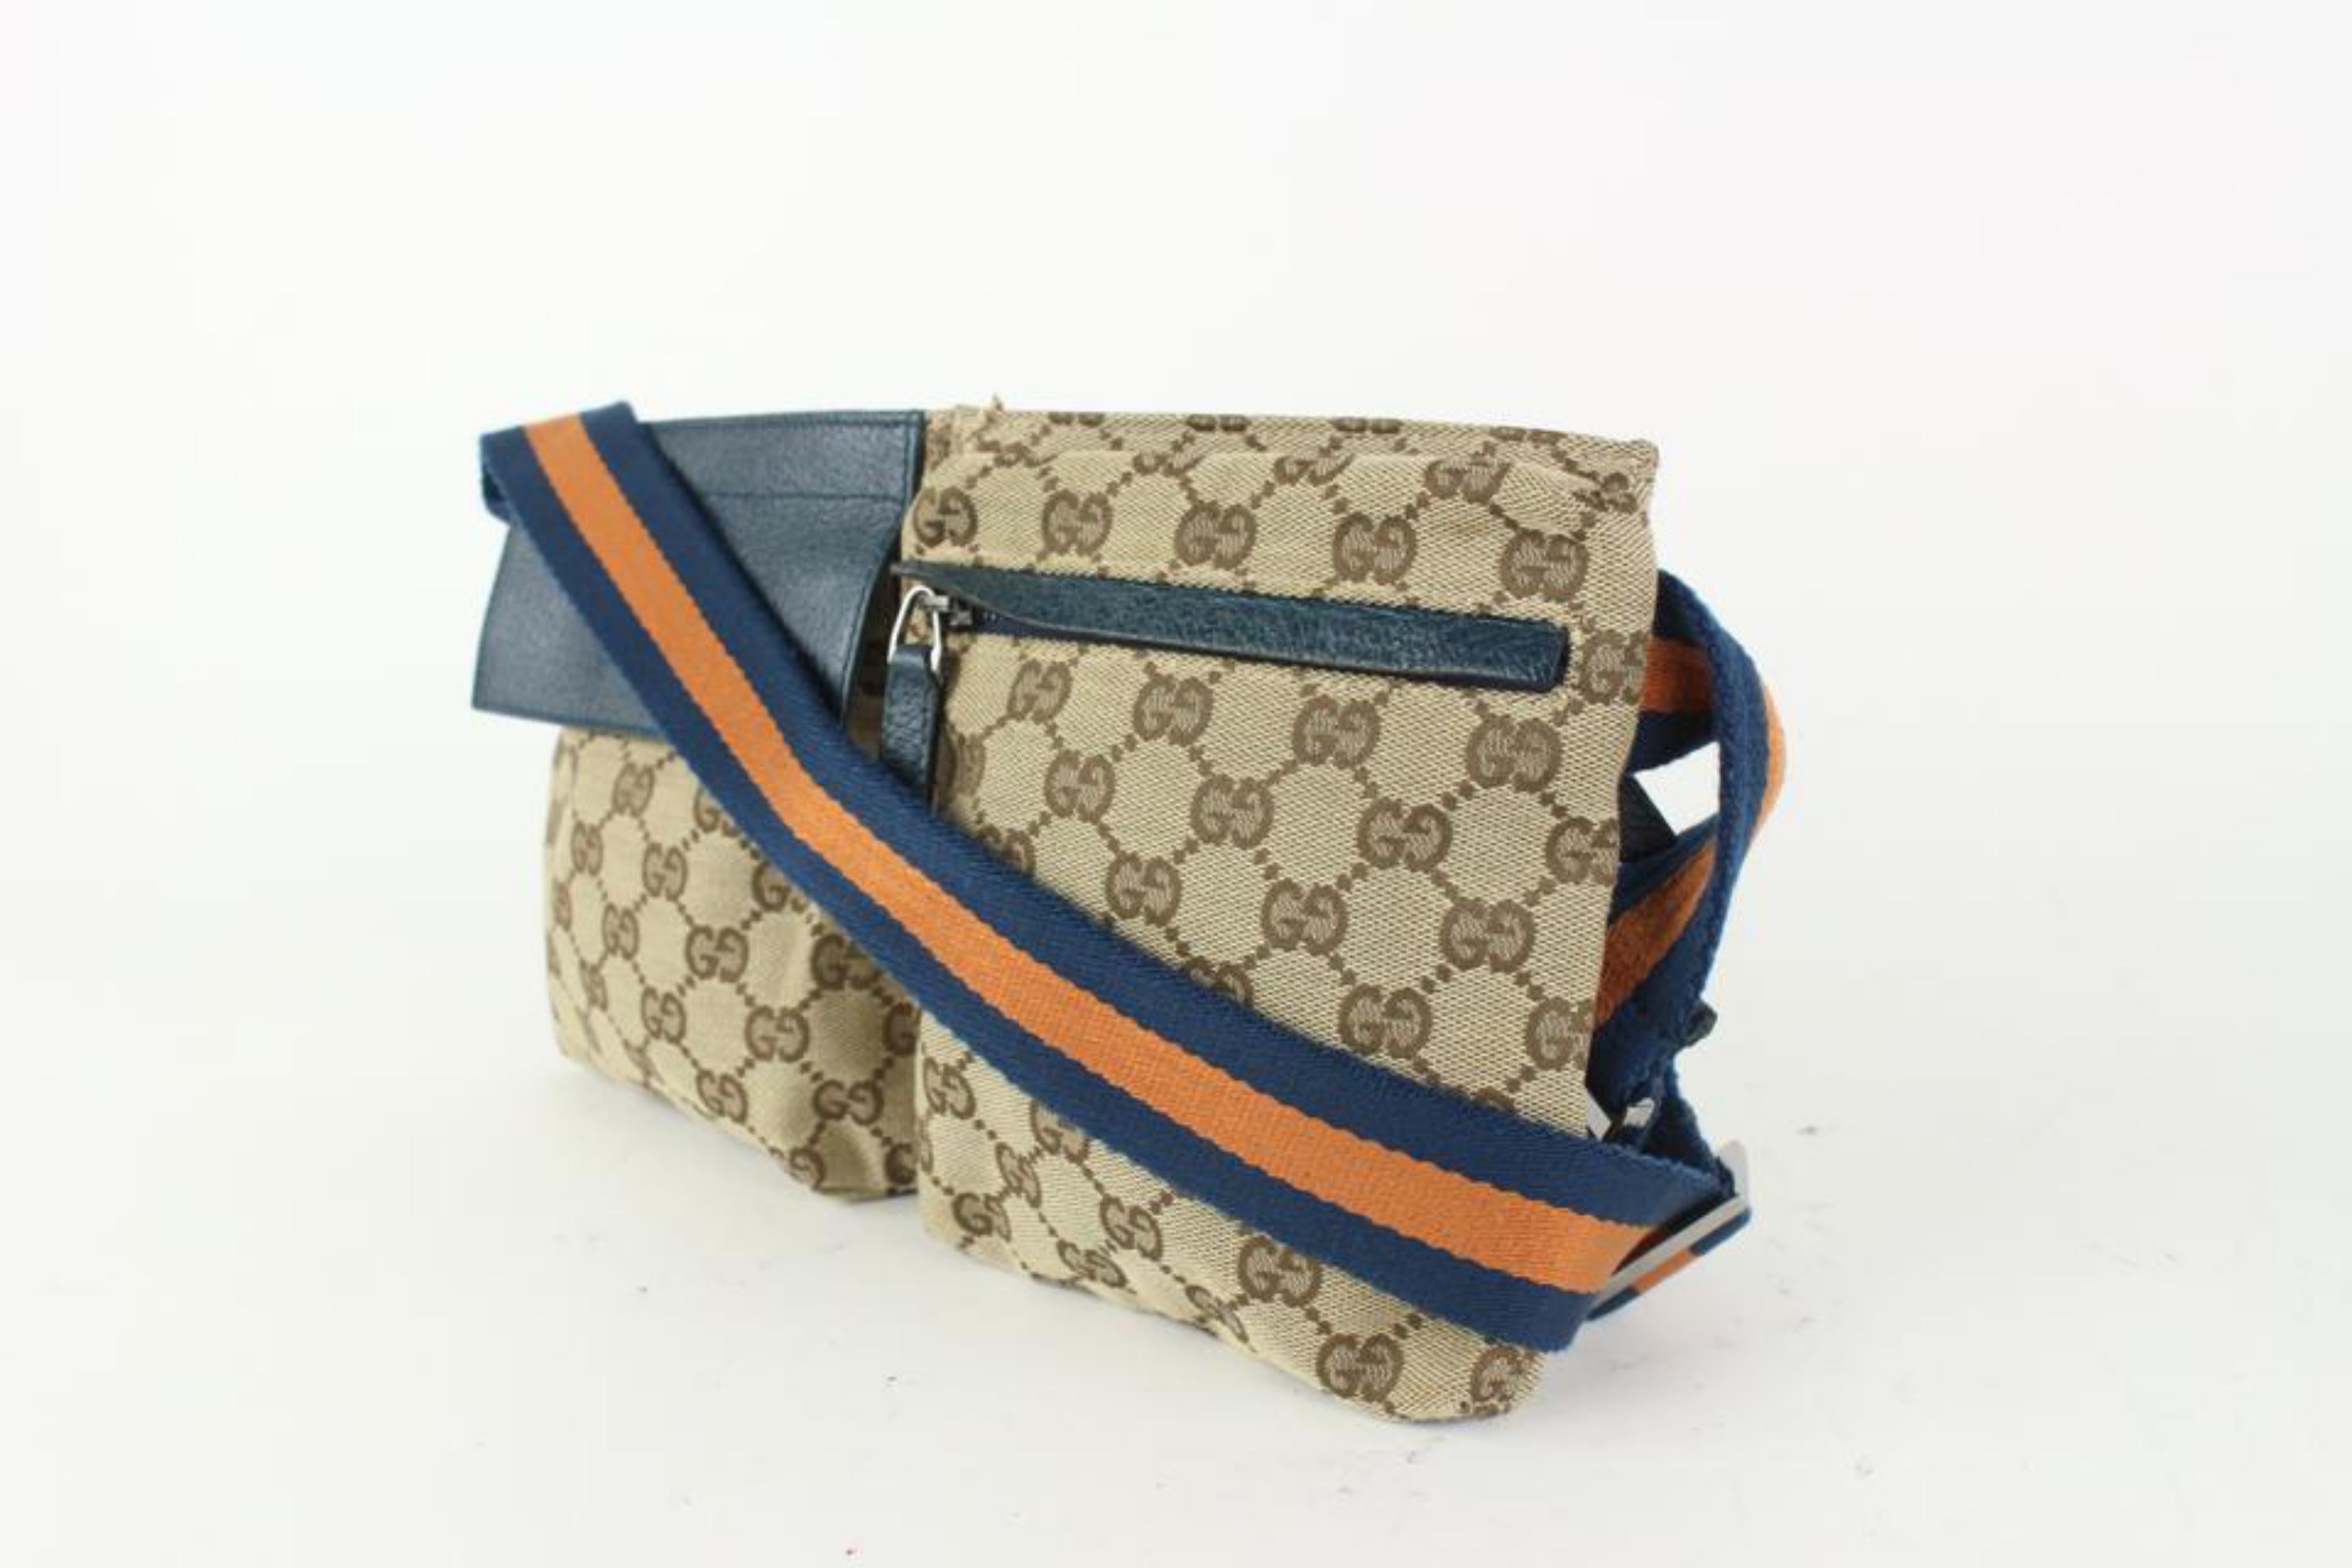 Gucci Navy x Orange Monogram Belt Bag Fanny Pack Waist Pouch 2GK110
Date Code/Serial Number: 28566 001013
Made In: Italy
Measurements: Length:  12